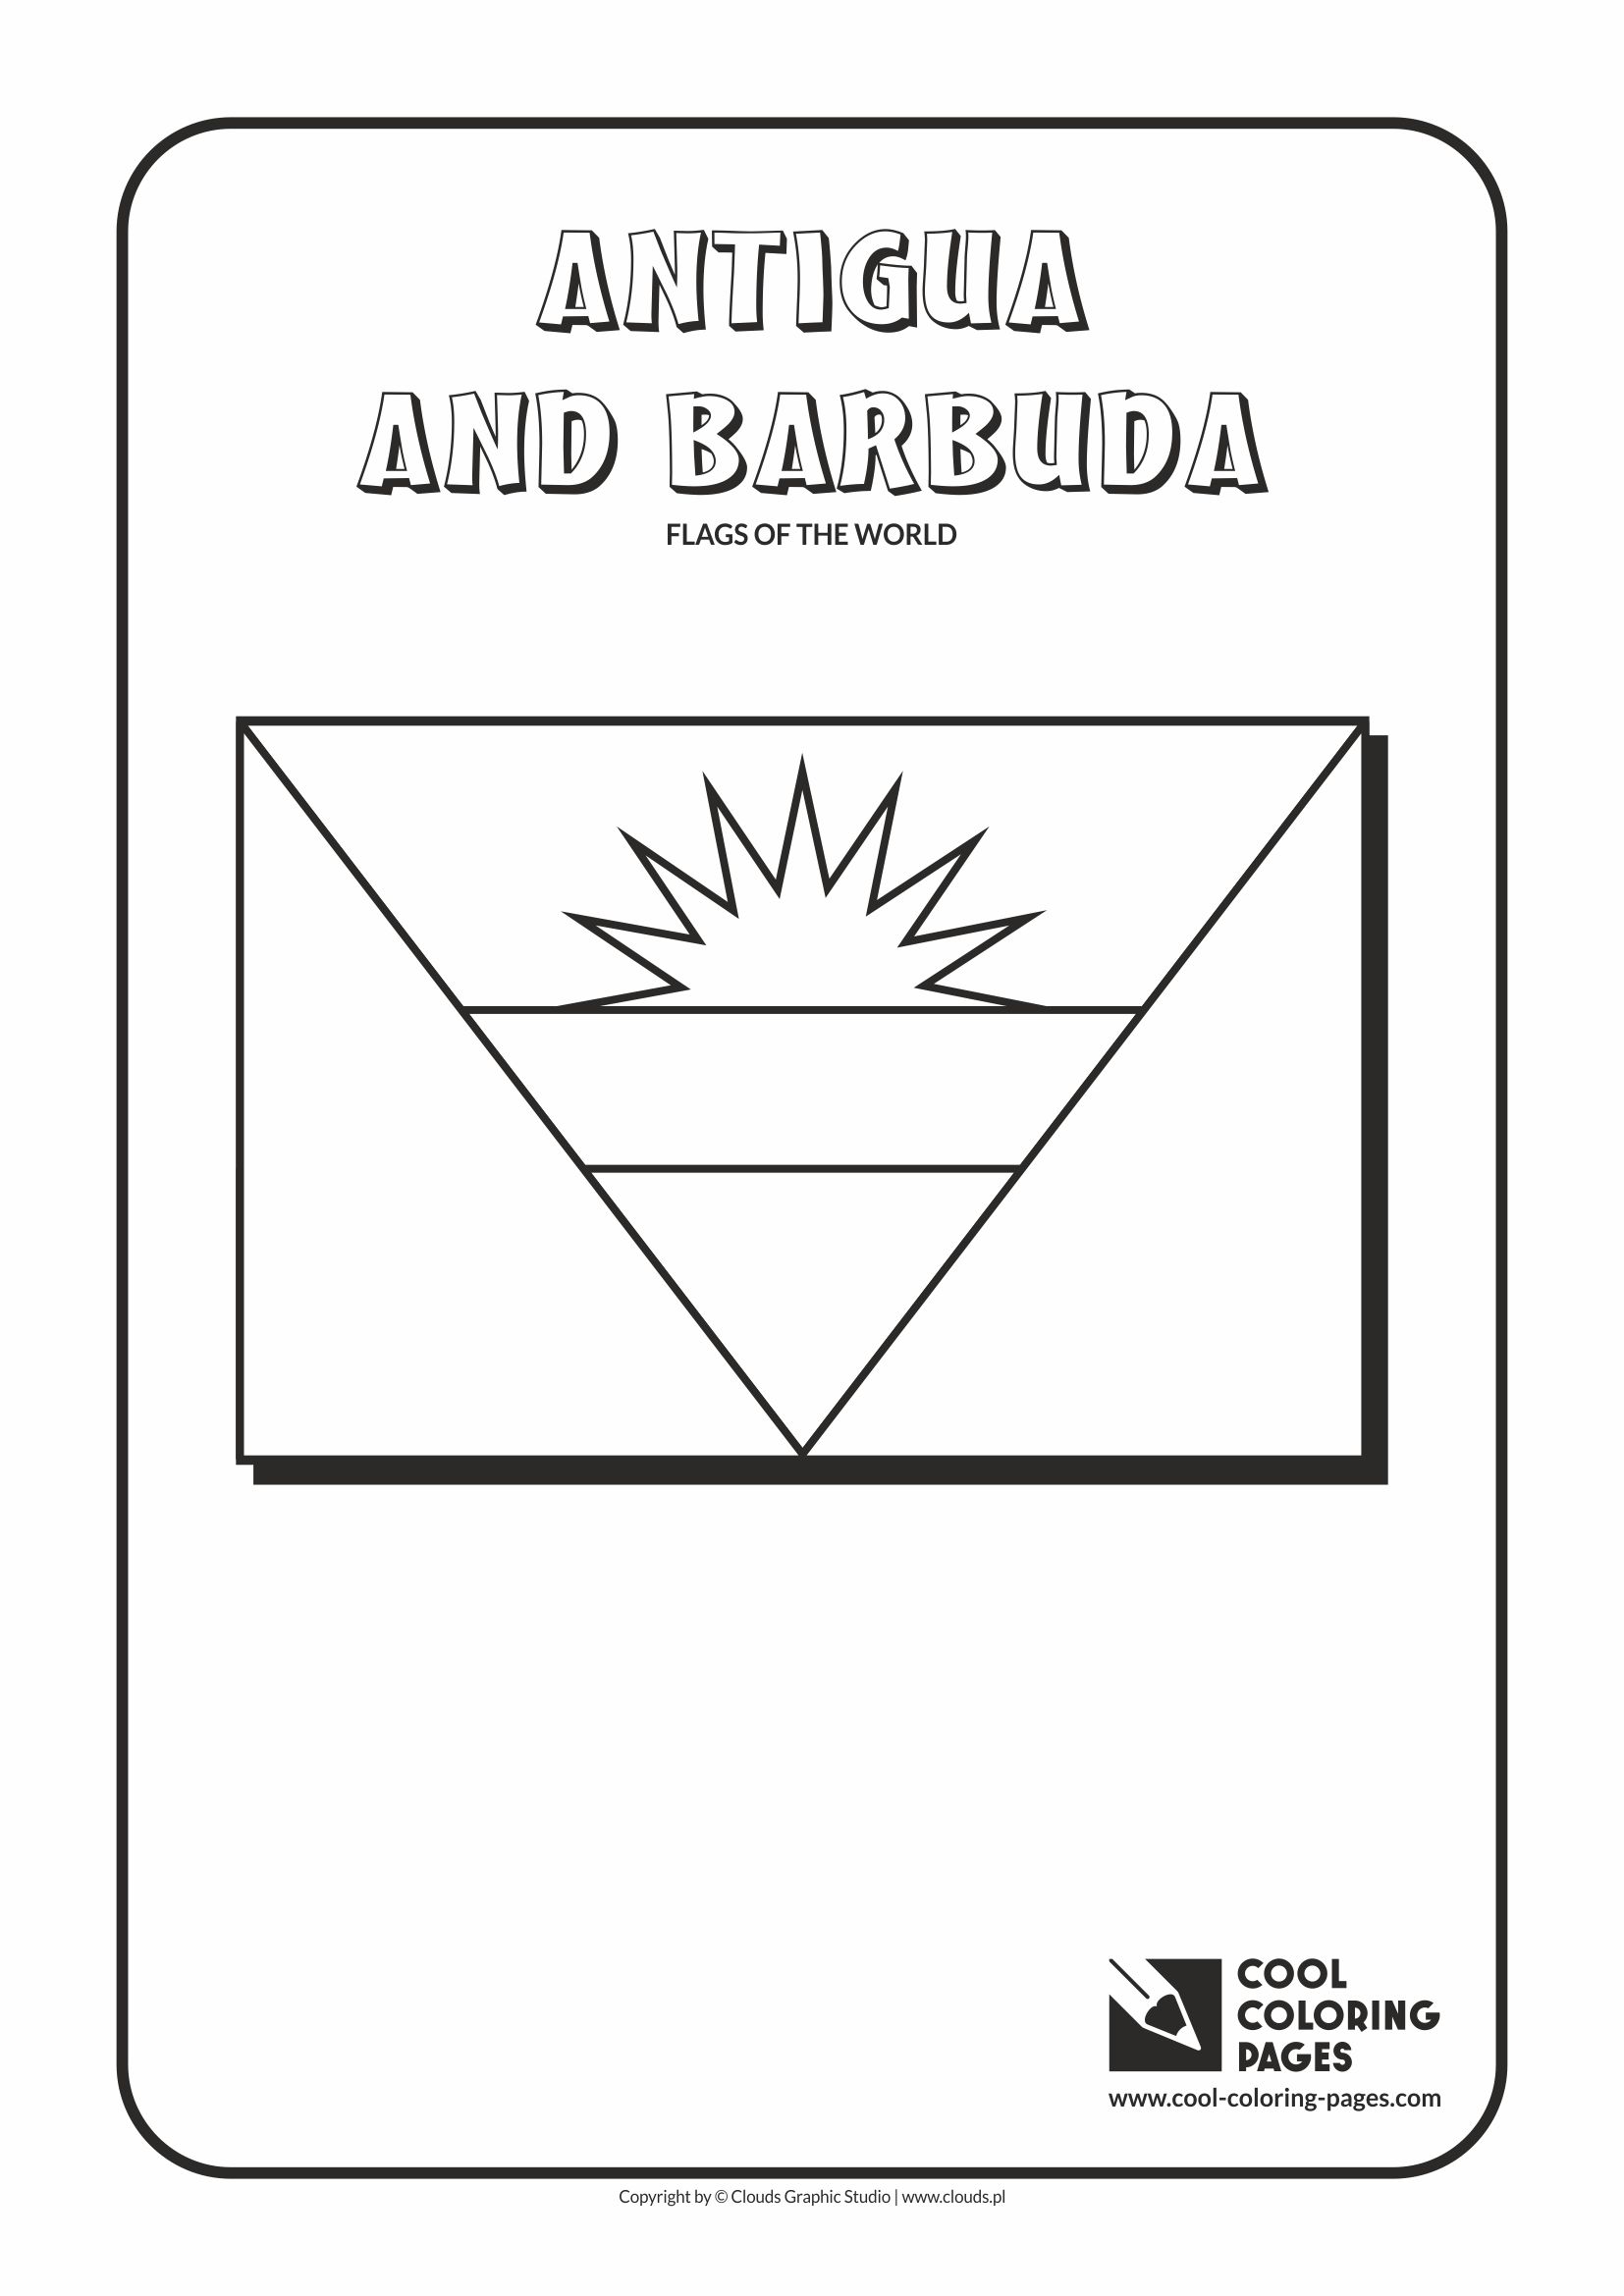 Cool coloring pages flags of the world